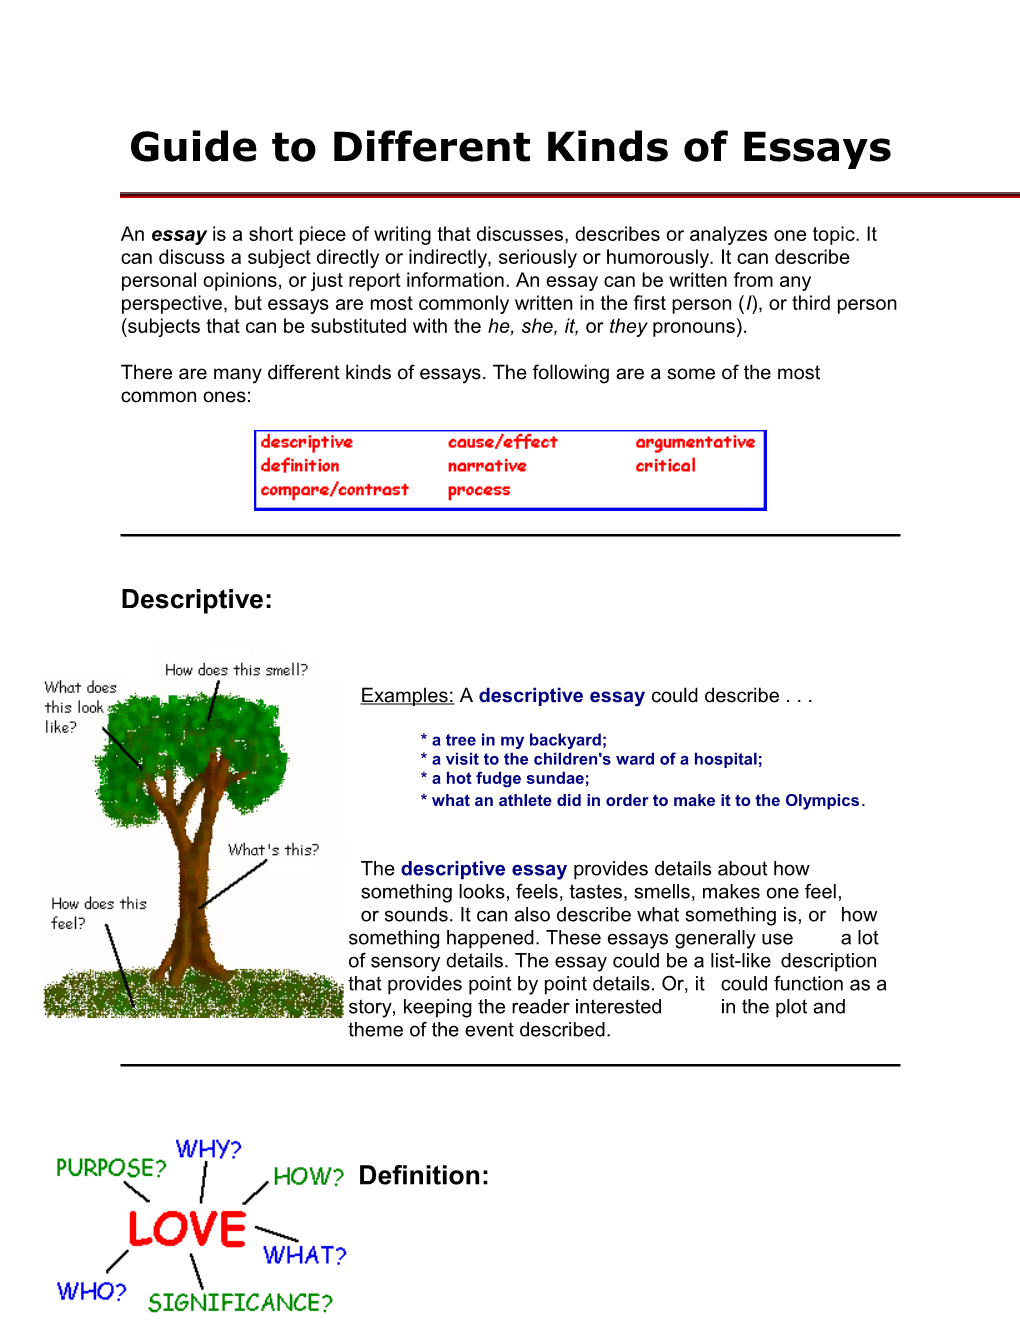 Guide to Different Kinds of Essays